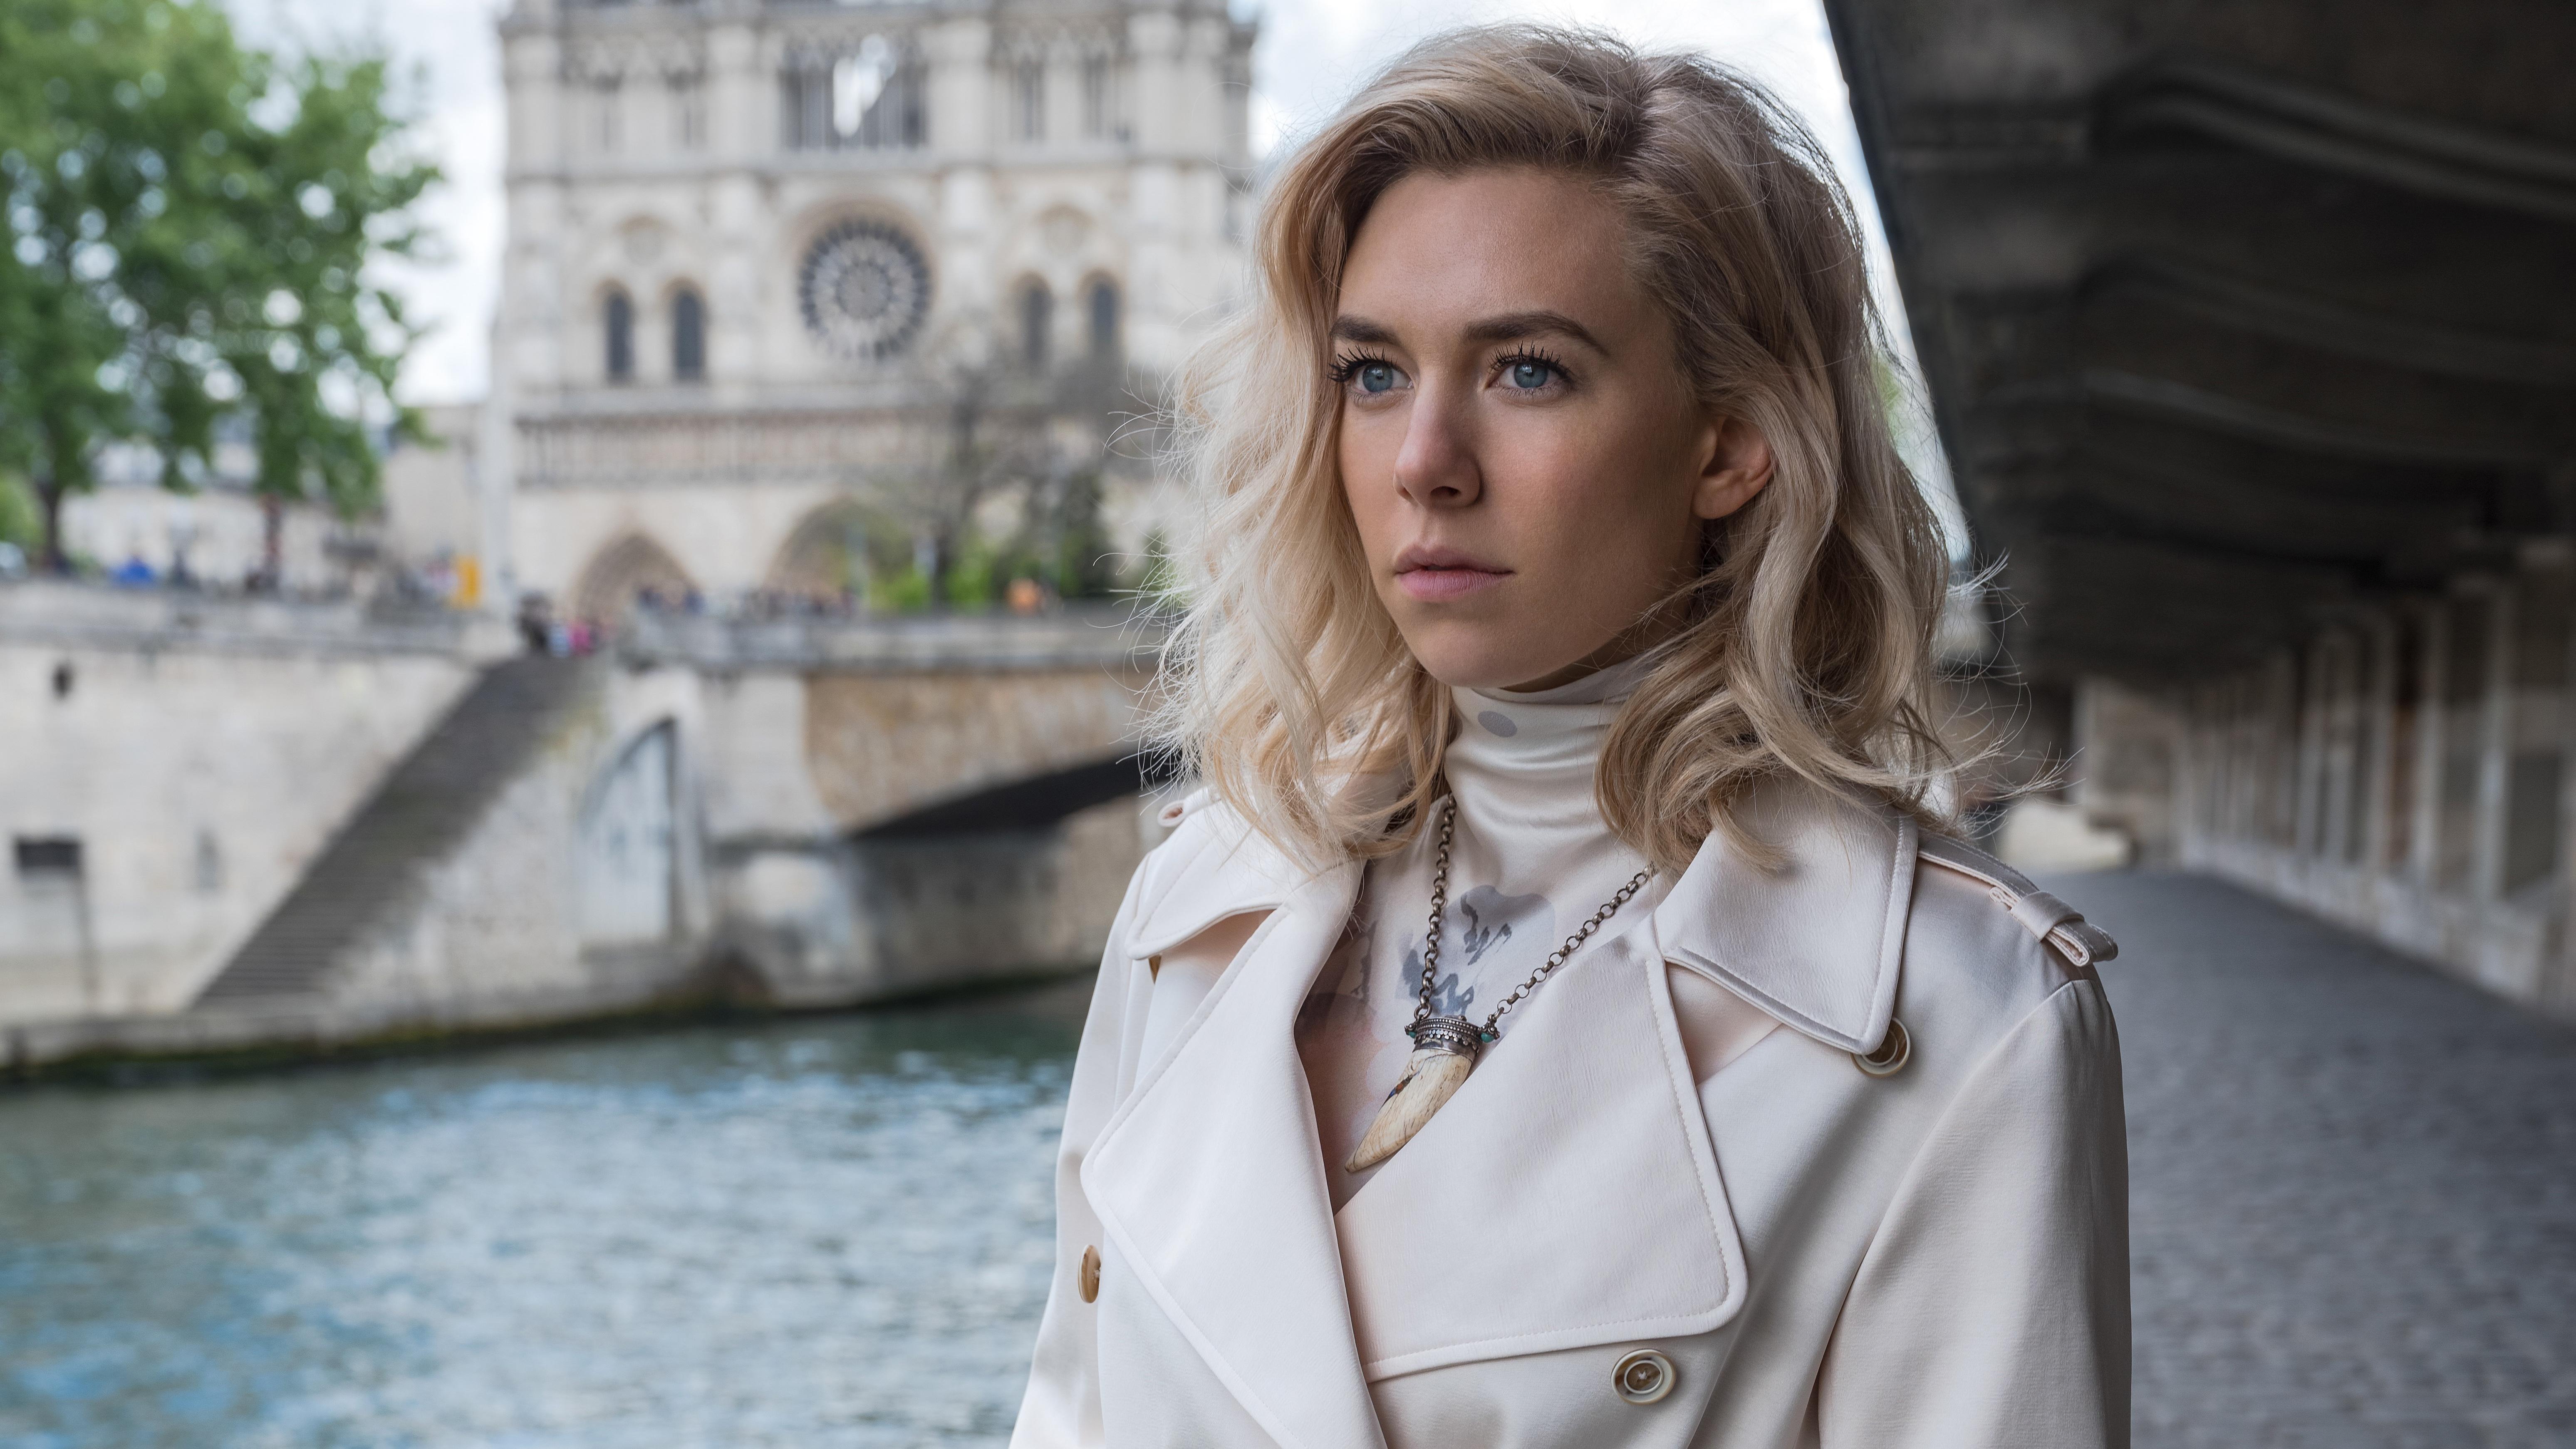 Vanessa Kirby In Mission Impossible Fallout 2018 5k, HD Movies, 4k